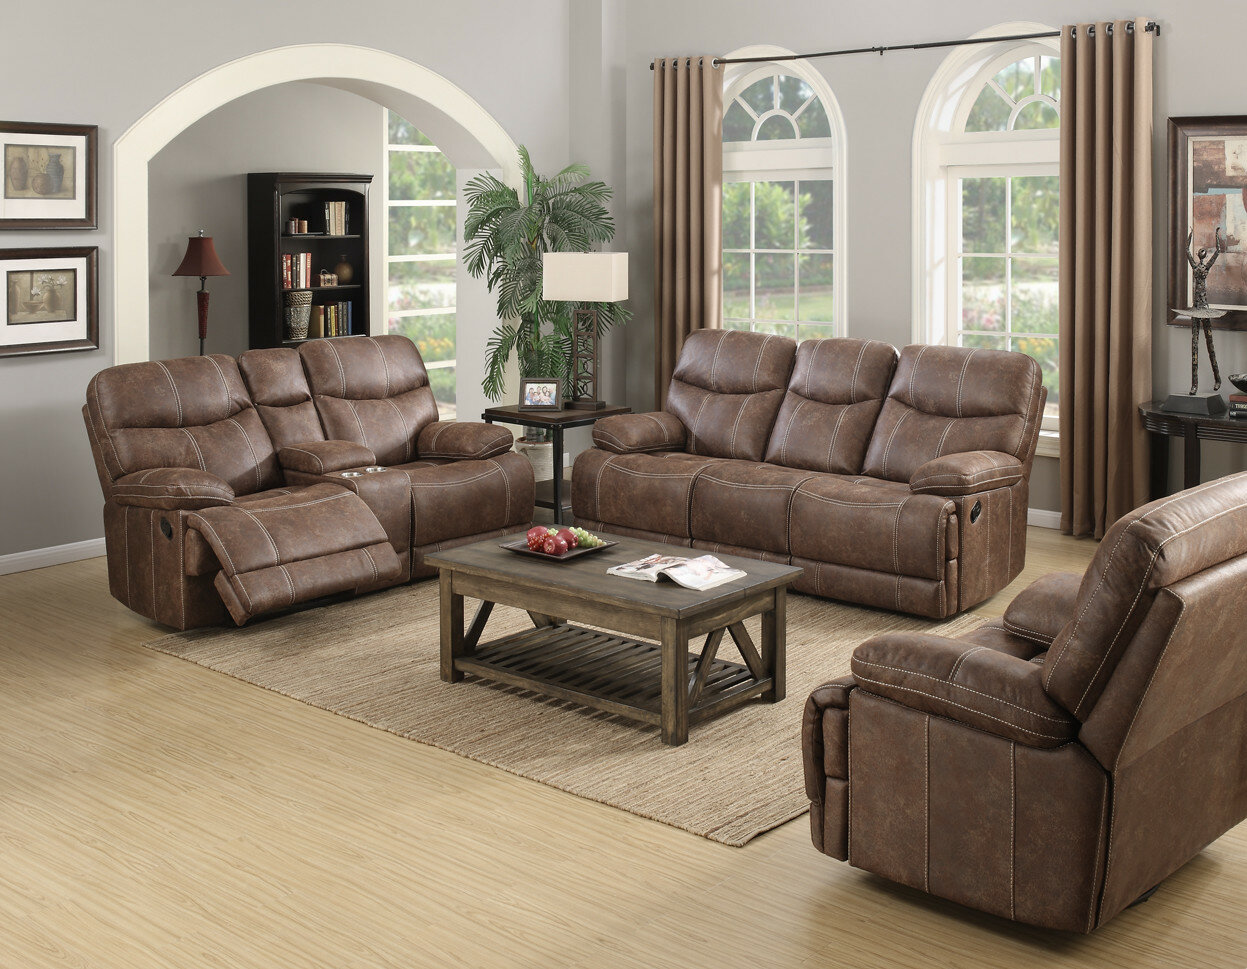 Chaves 3 Piece Faux Leather Reclining Living Room Set